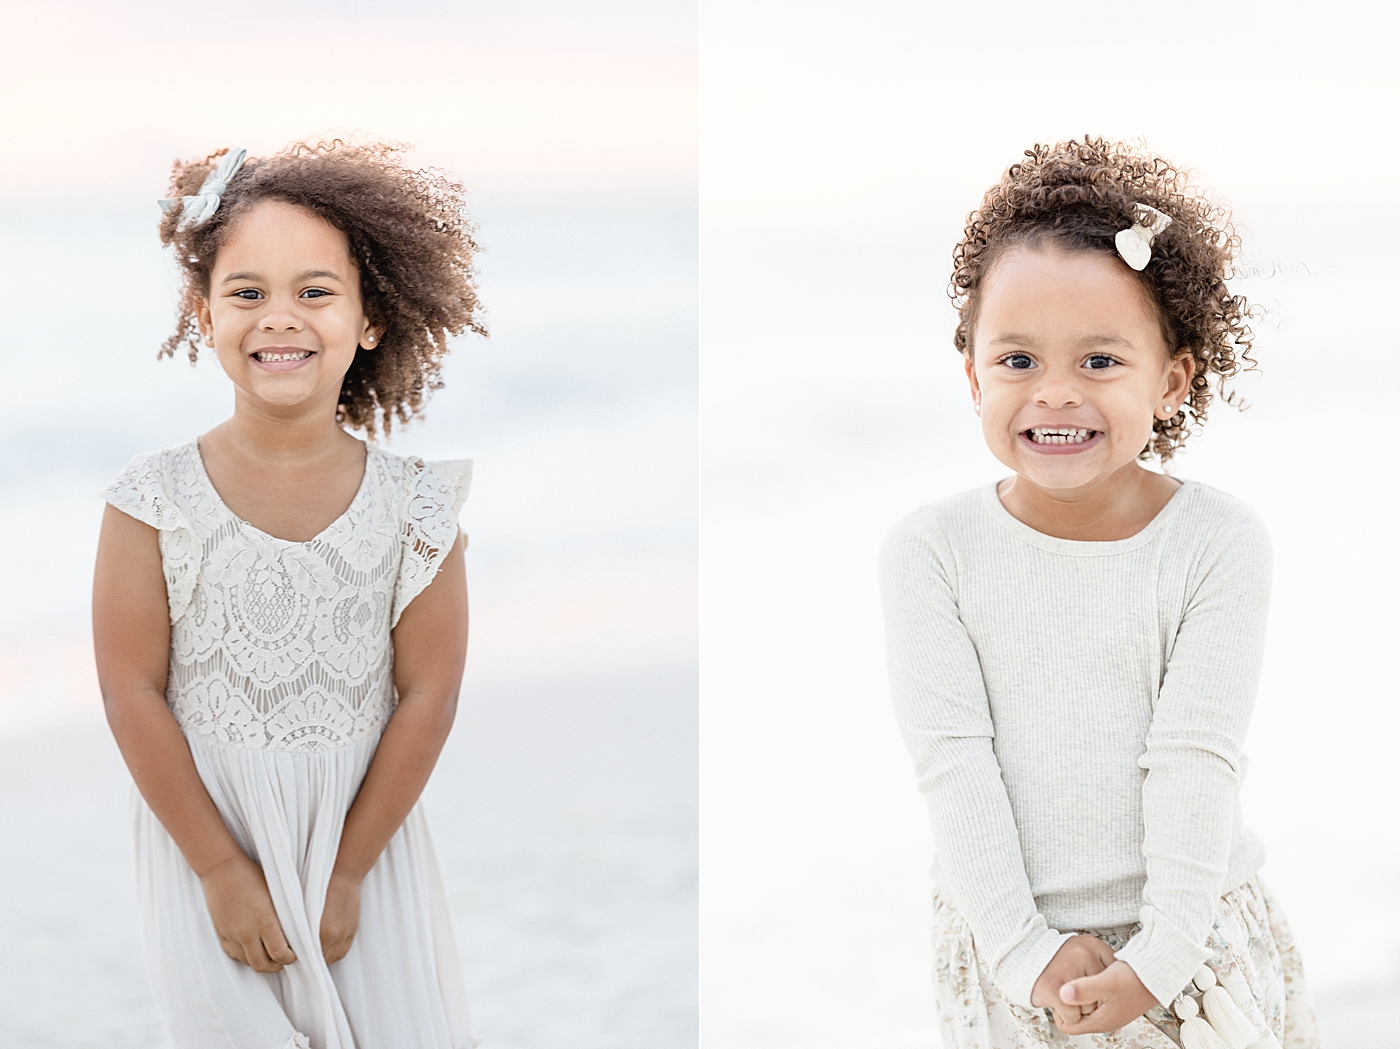 Children's portraits on the beach. Photo by Brittany Elise Photography.